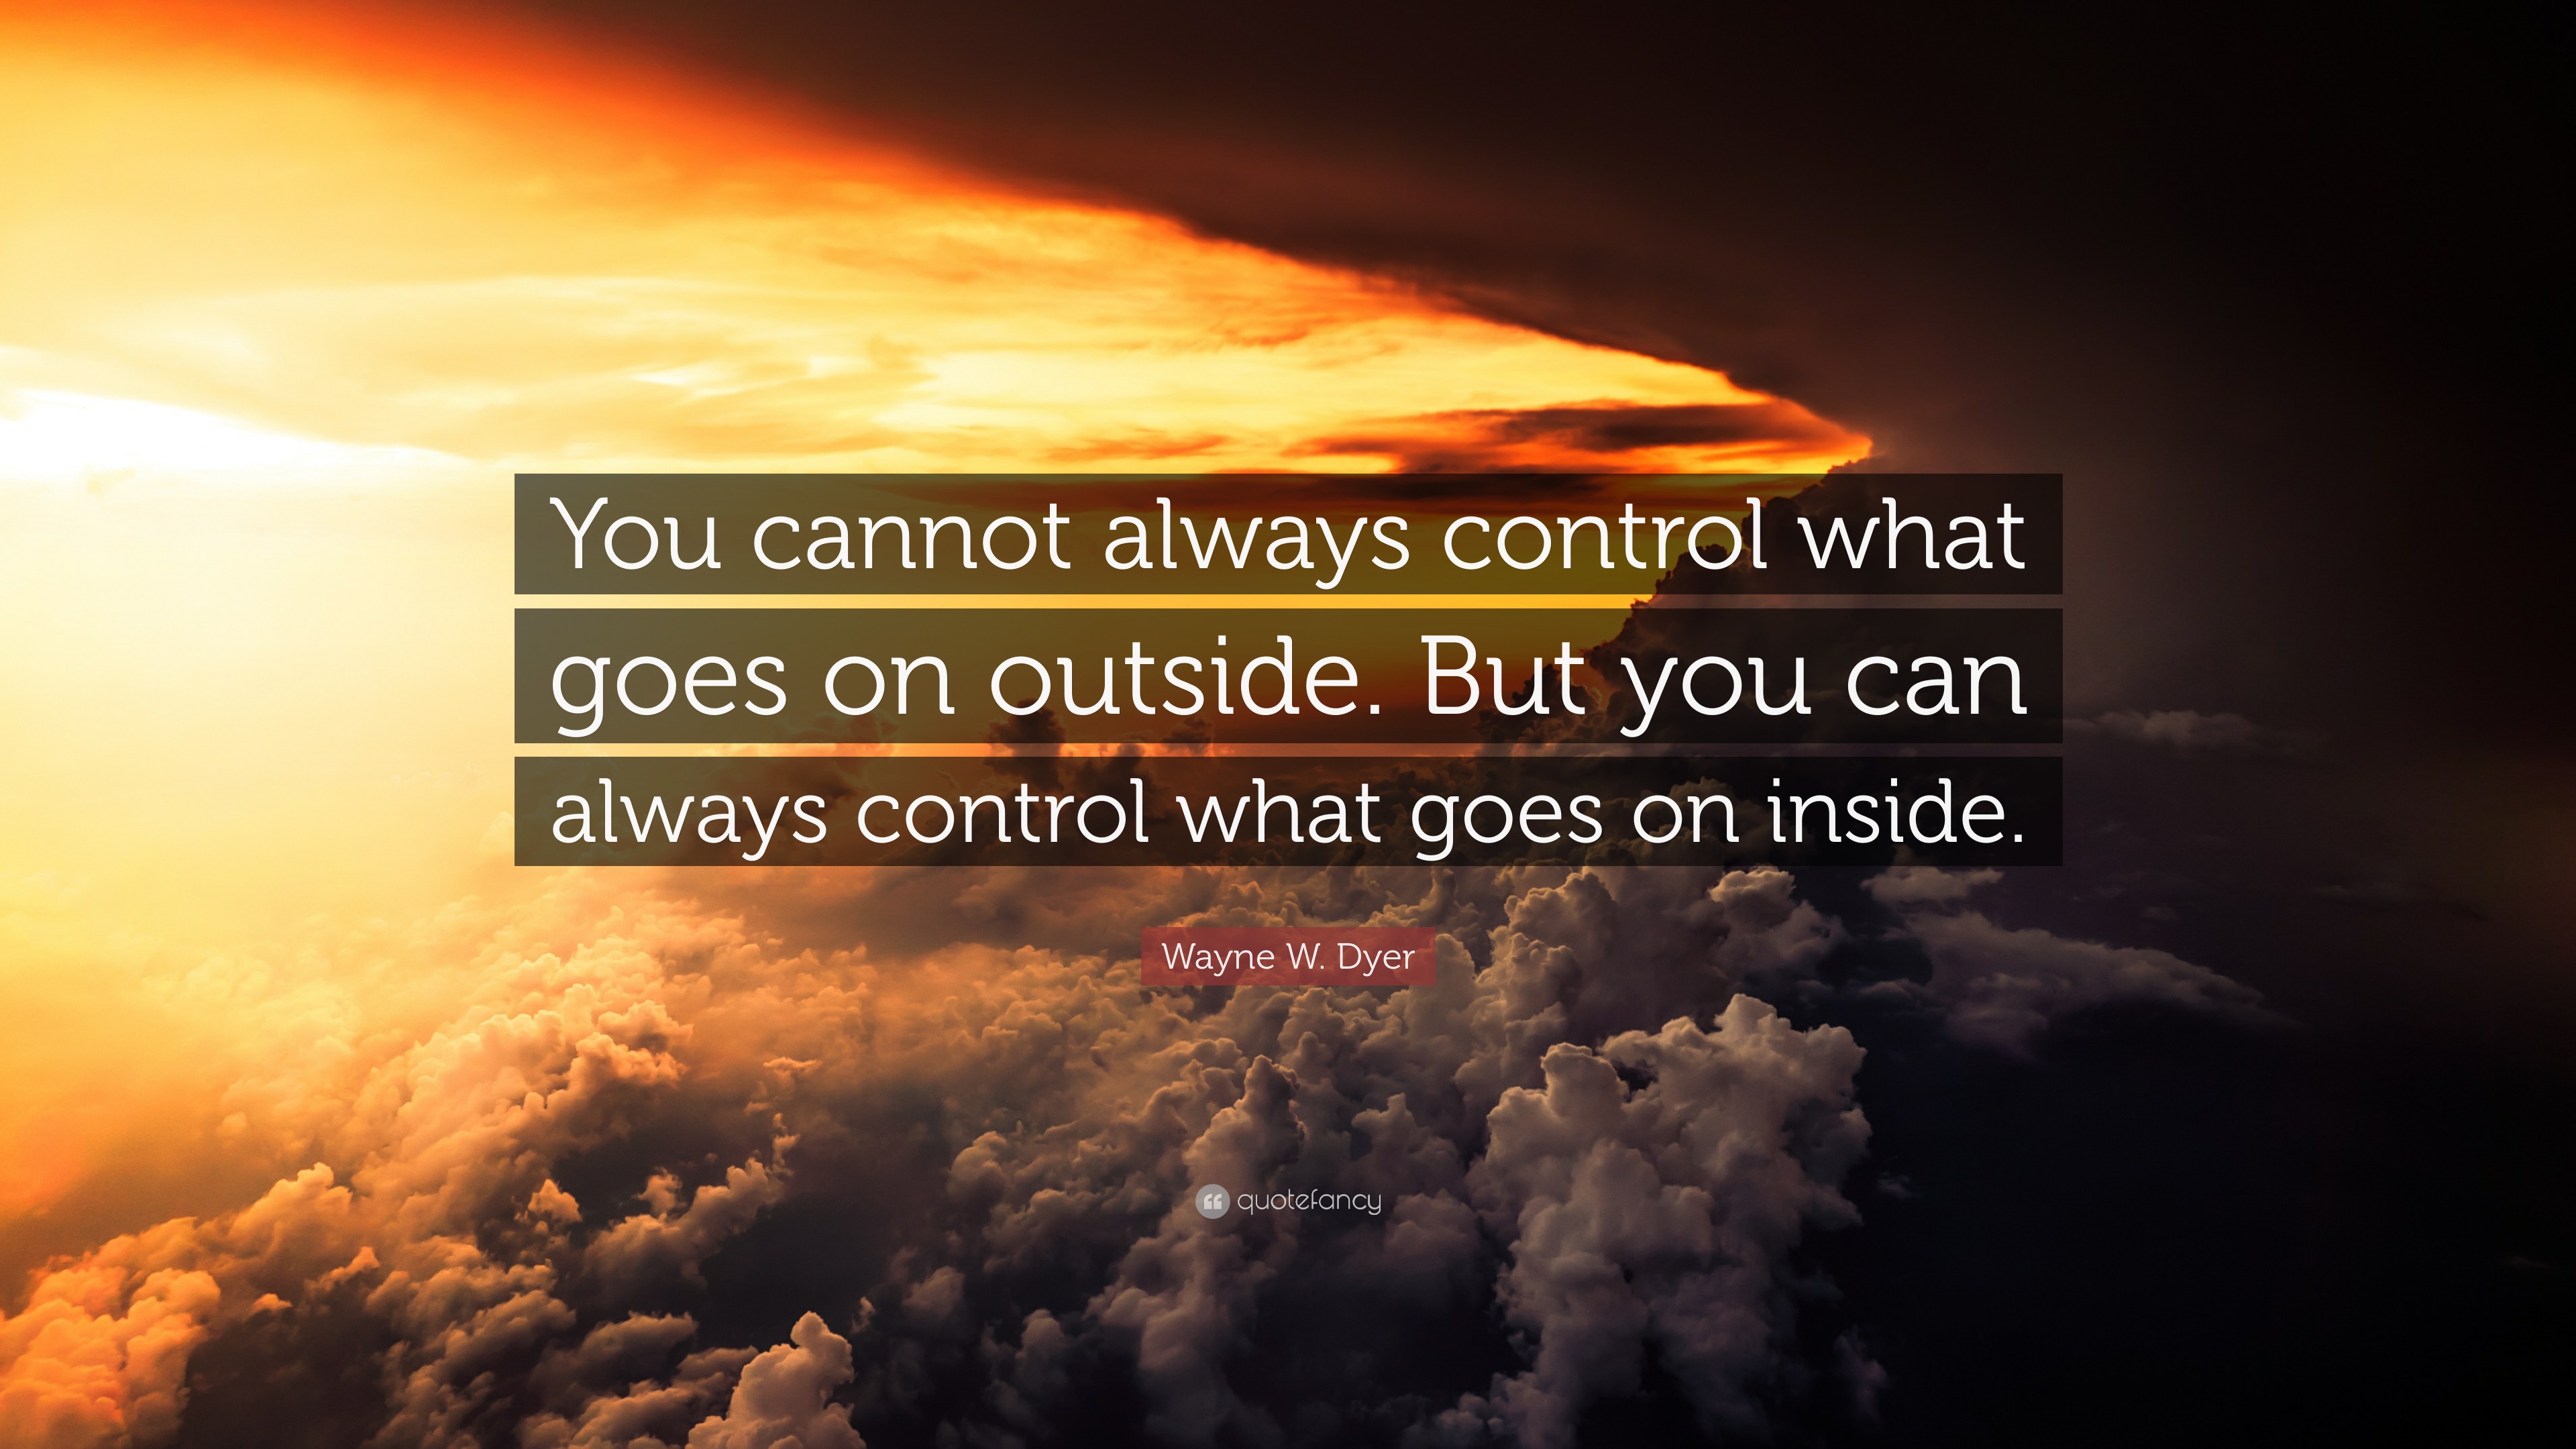 Wayne W. Dyer Quote: “You cannot always control what goes on outside